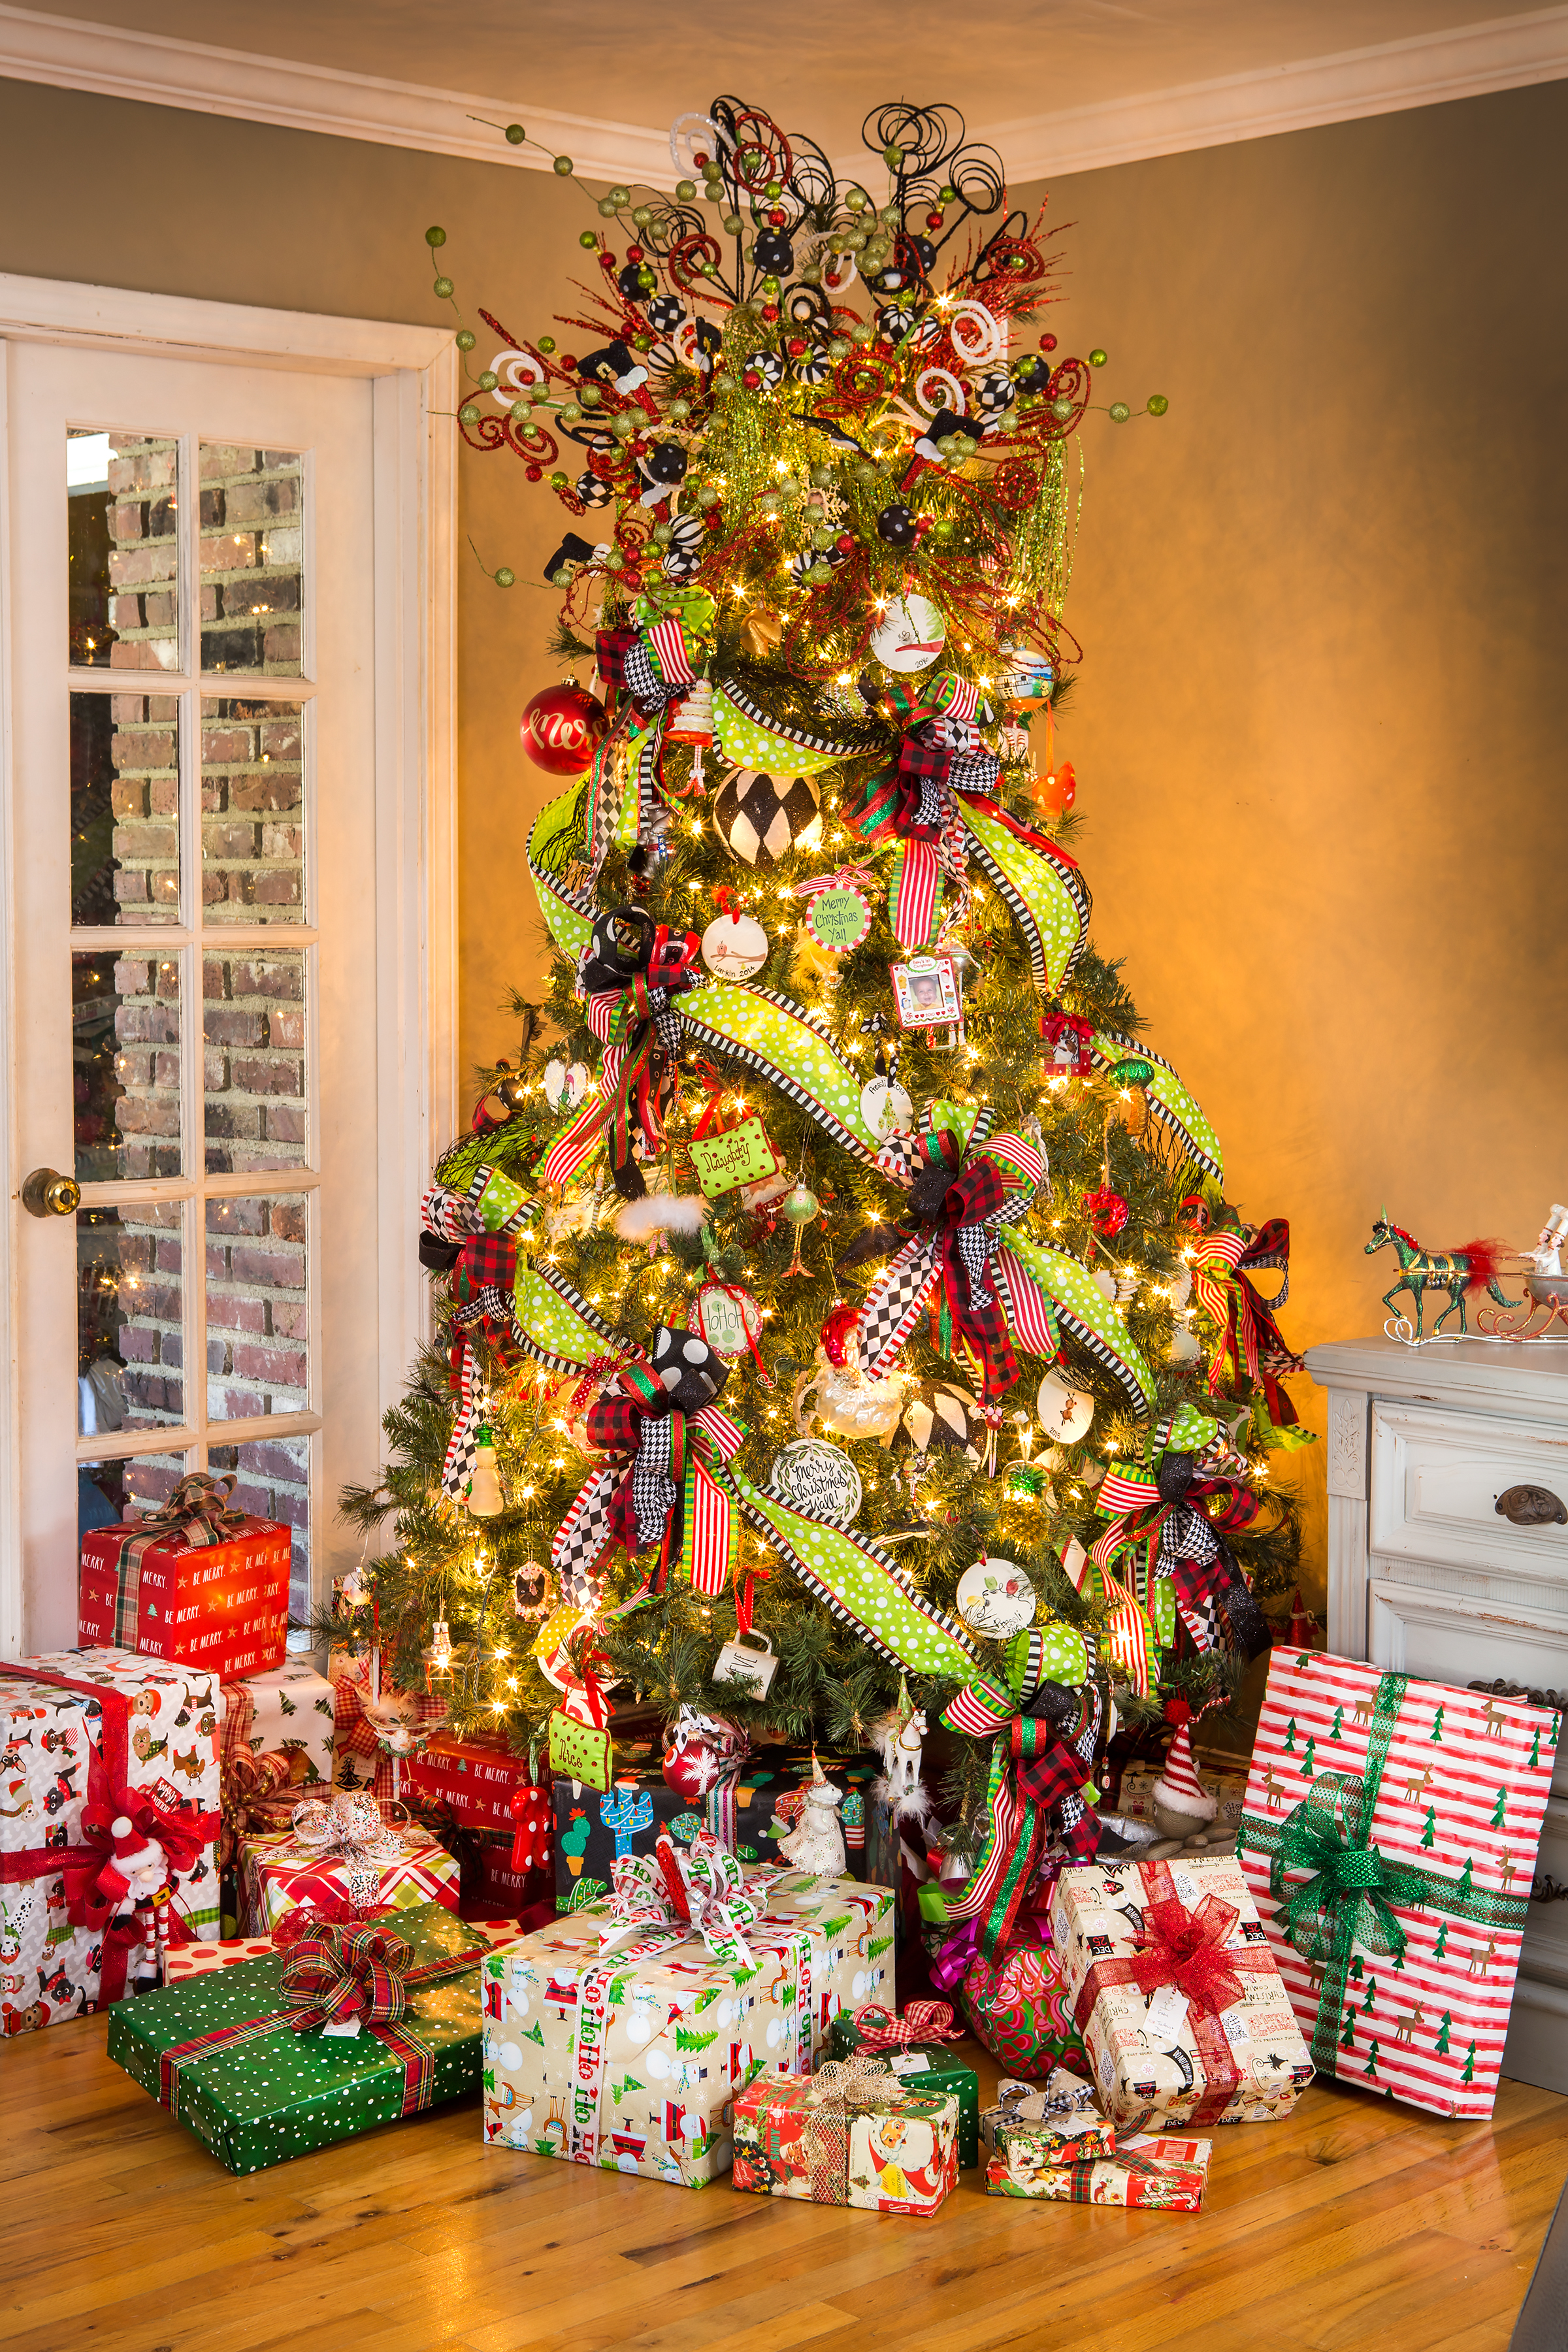 Karli and Gabriel Reynolds’ Christmas tree is inspired by Dr. Seuss’ whimsical, crazy, colorful children’s books. For the past five years, Karli has used a theme of lime green, black, and red with her artificial tree, but she says it is always evolving. Karli does all the decorating herself, often traveling to stores like Carolina Pottery to create the explosion of color with bows and ribbons that sprays across the tree from top to bottom. Perfectly wrapped gifts are placed for color and balance. Handmade ornaments by her two children, Pressli, 9, and Larkin, 6, give the tree a personal touch.  